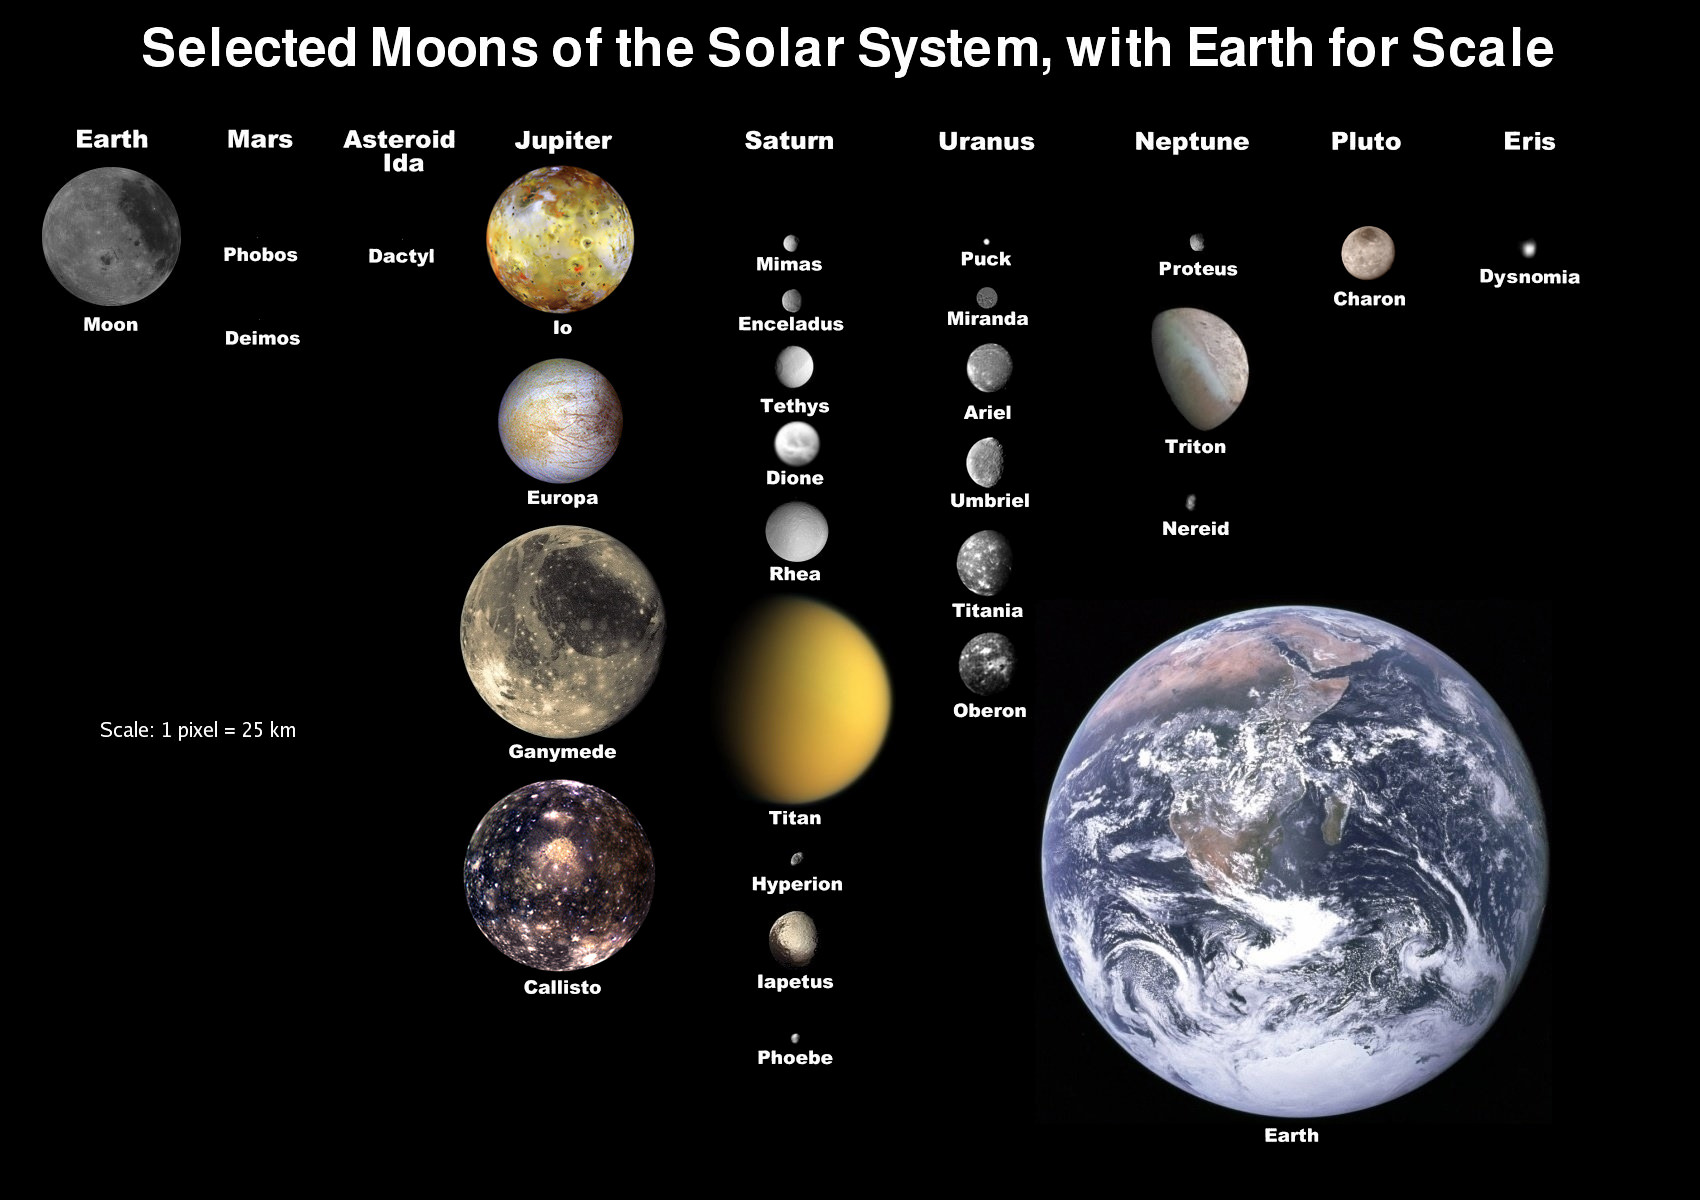 How Many Planets Are There in the Solar System